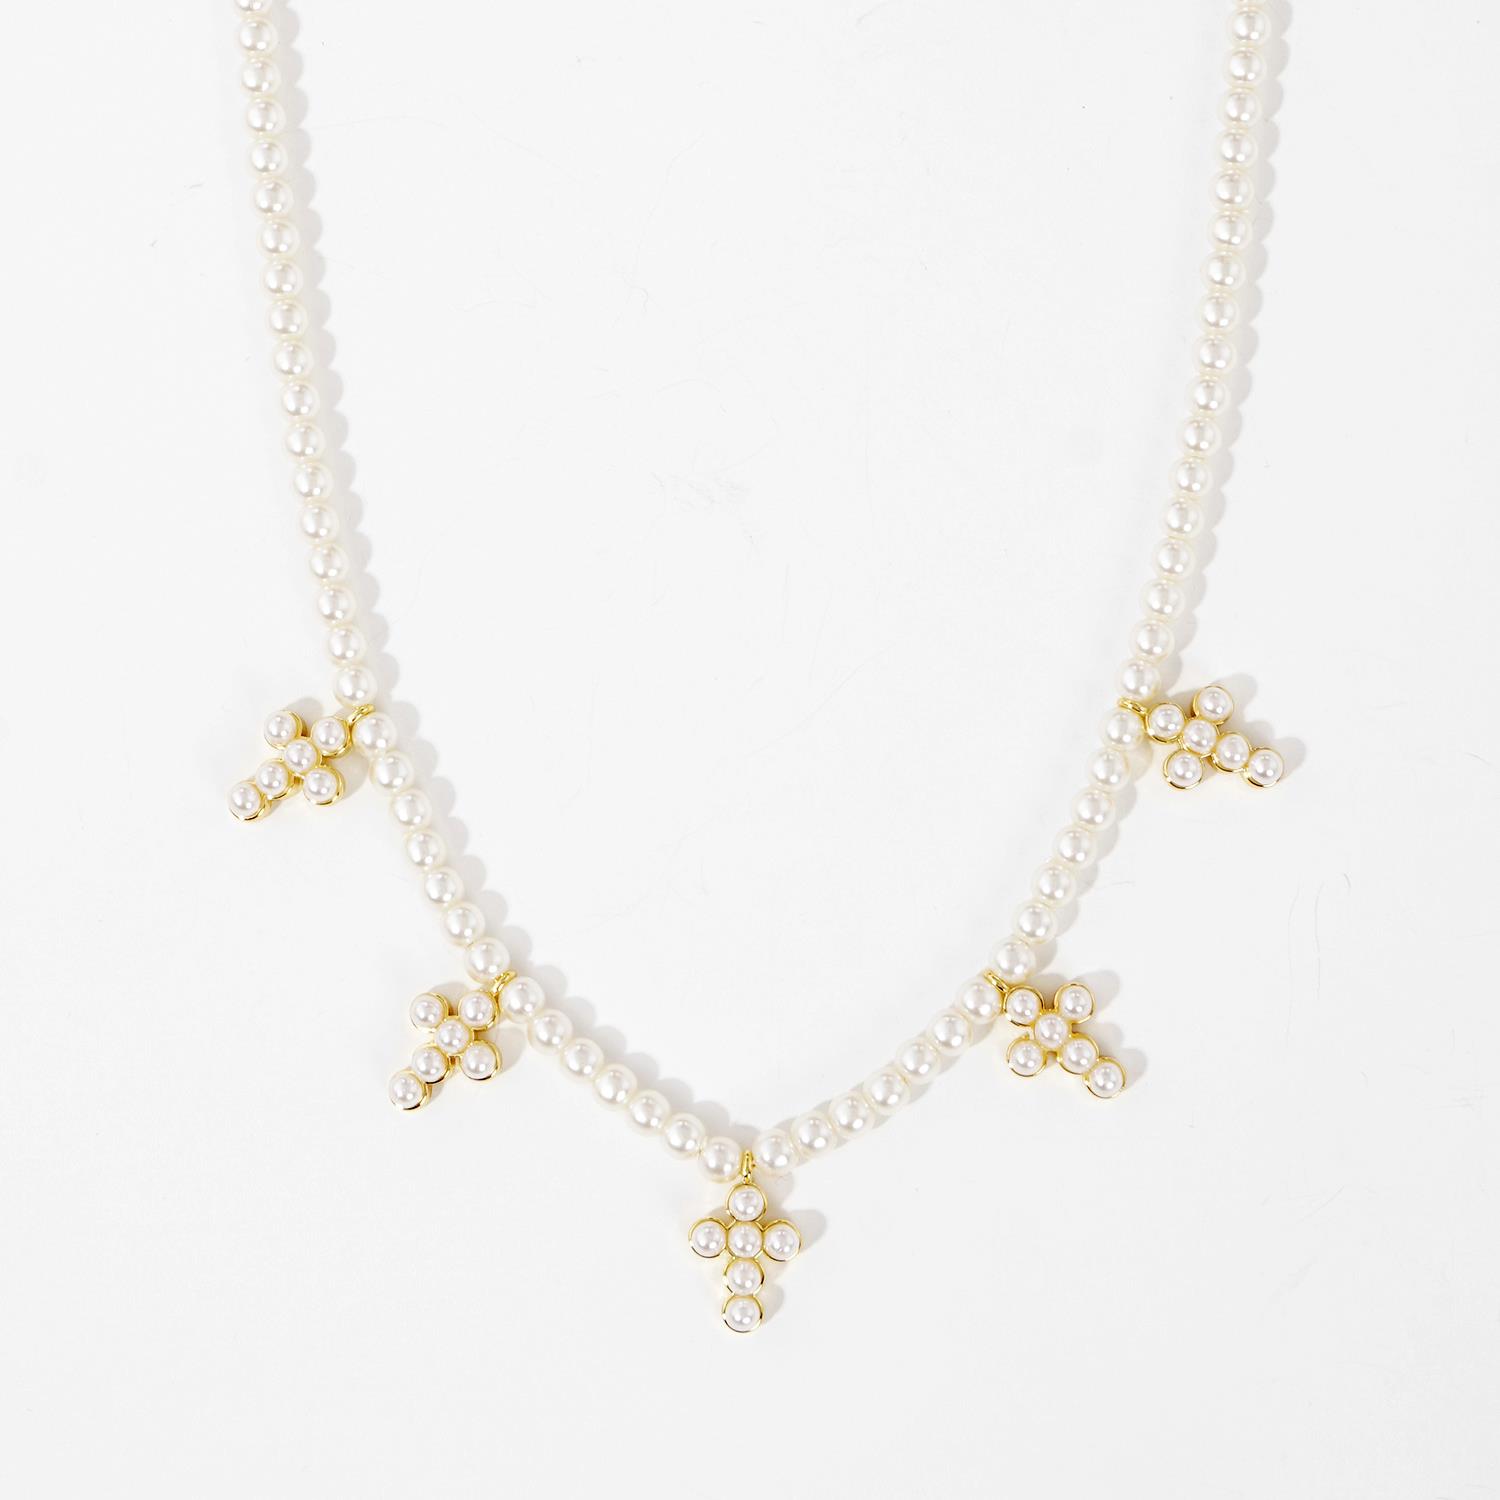 PEARL DAINTY NECKLACE